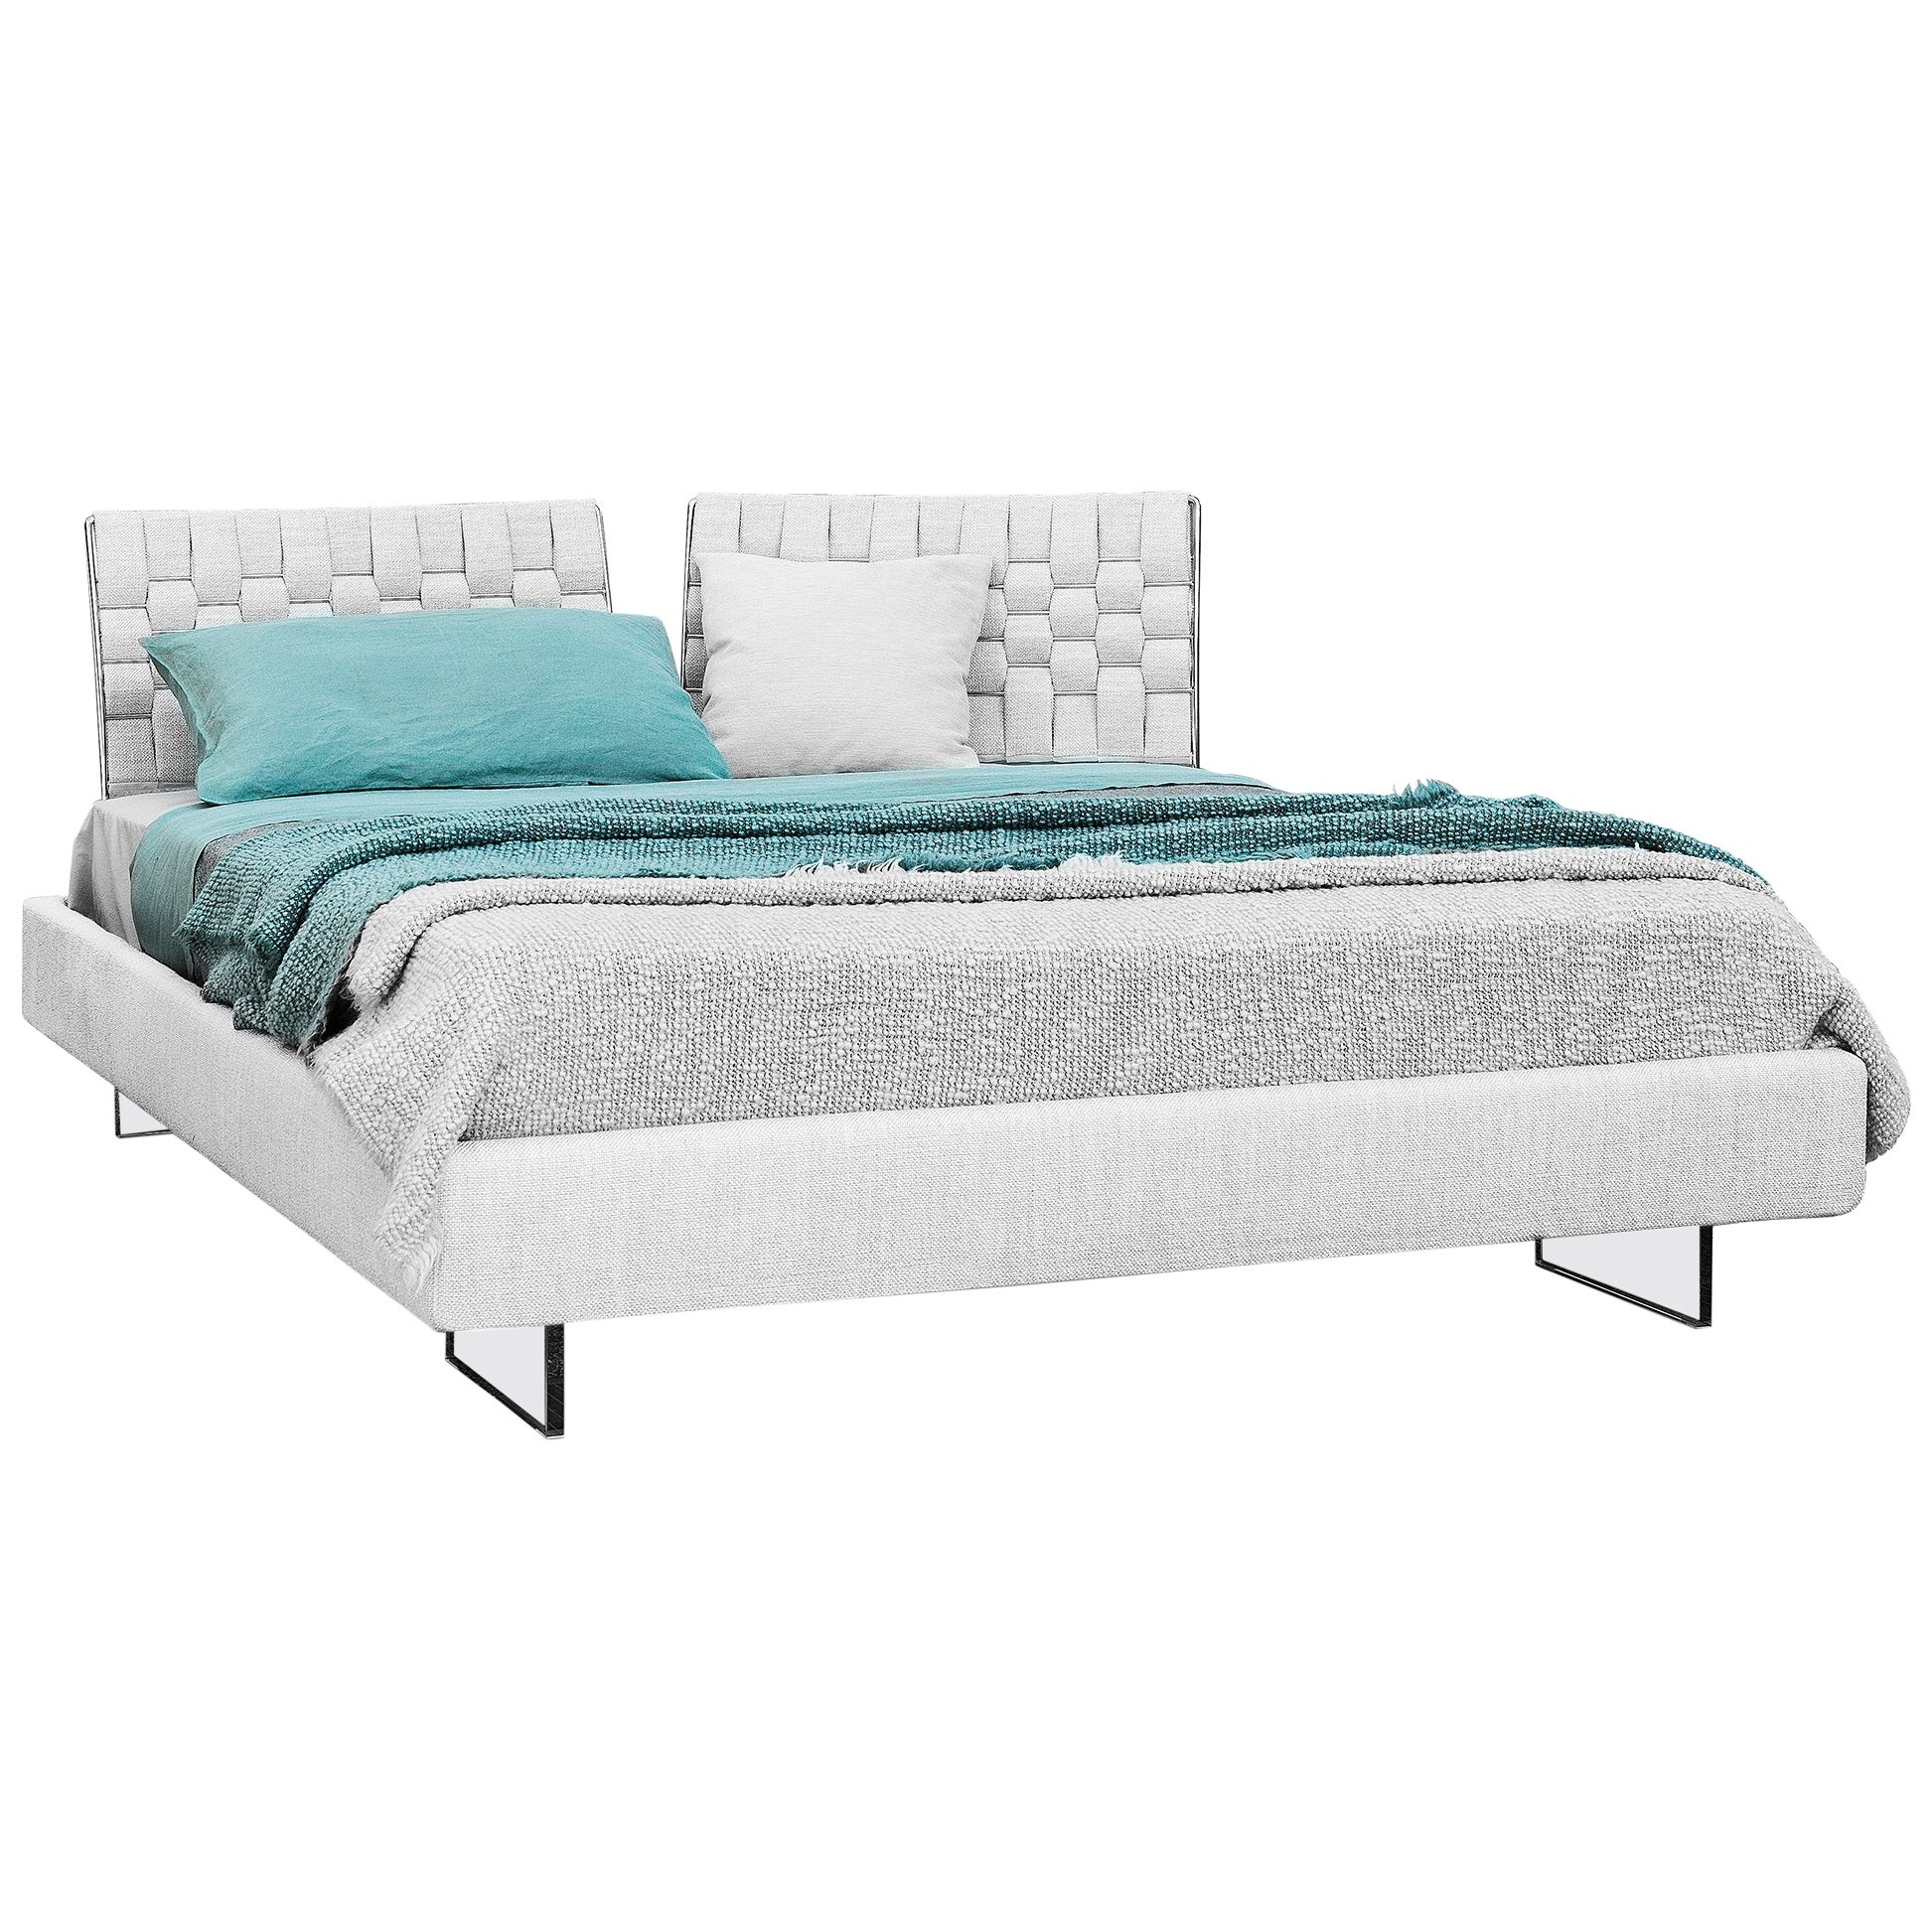 Letto Limes King Size Bed in White Avant Après with Padded Bands Headboard For Sale